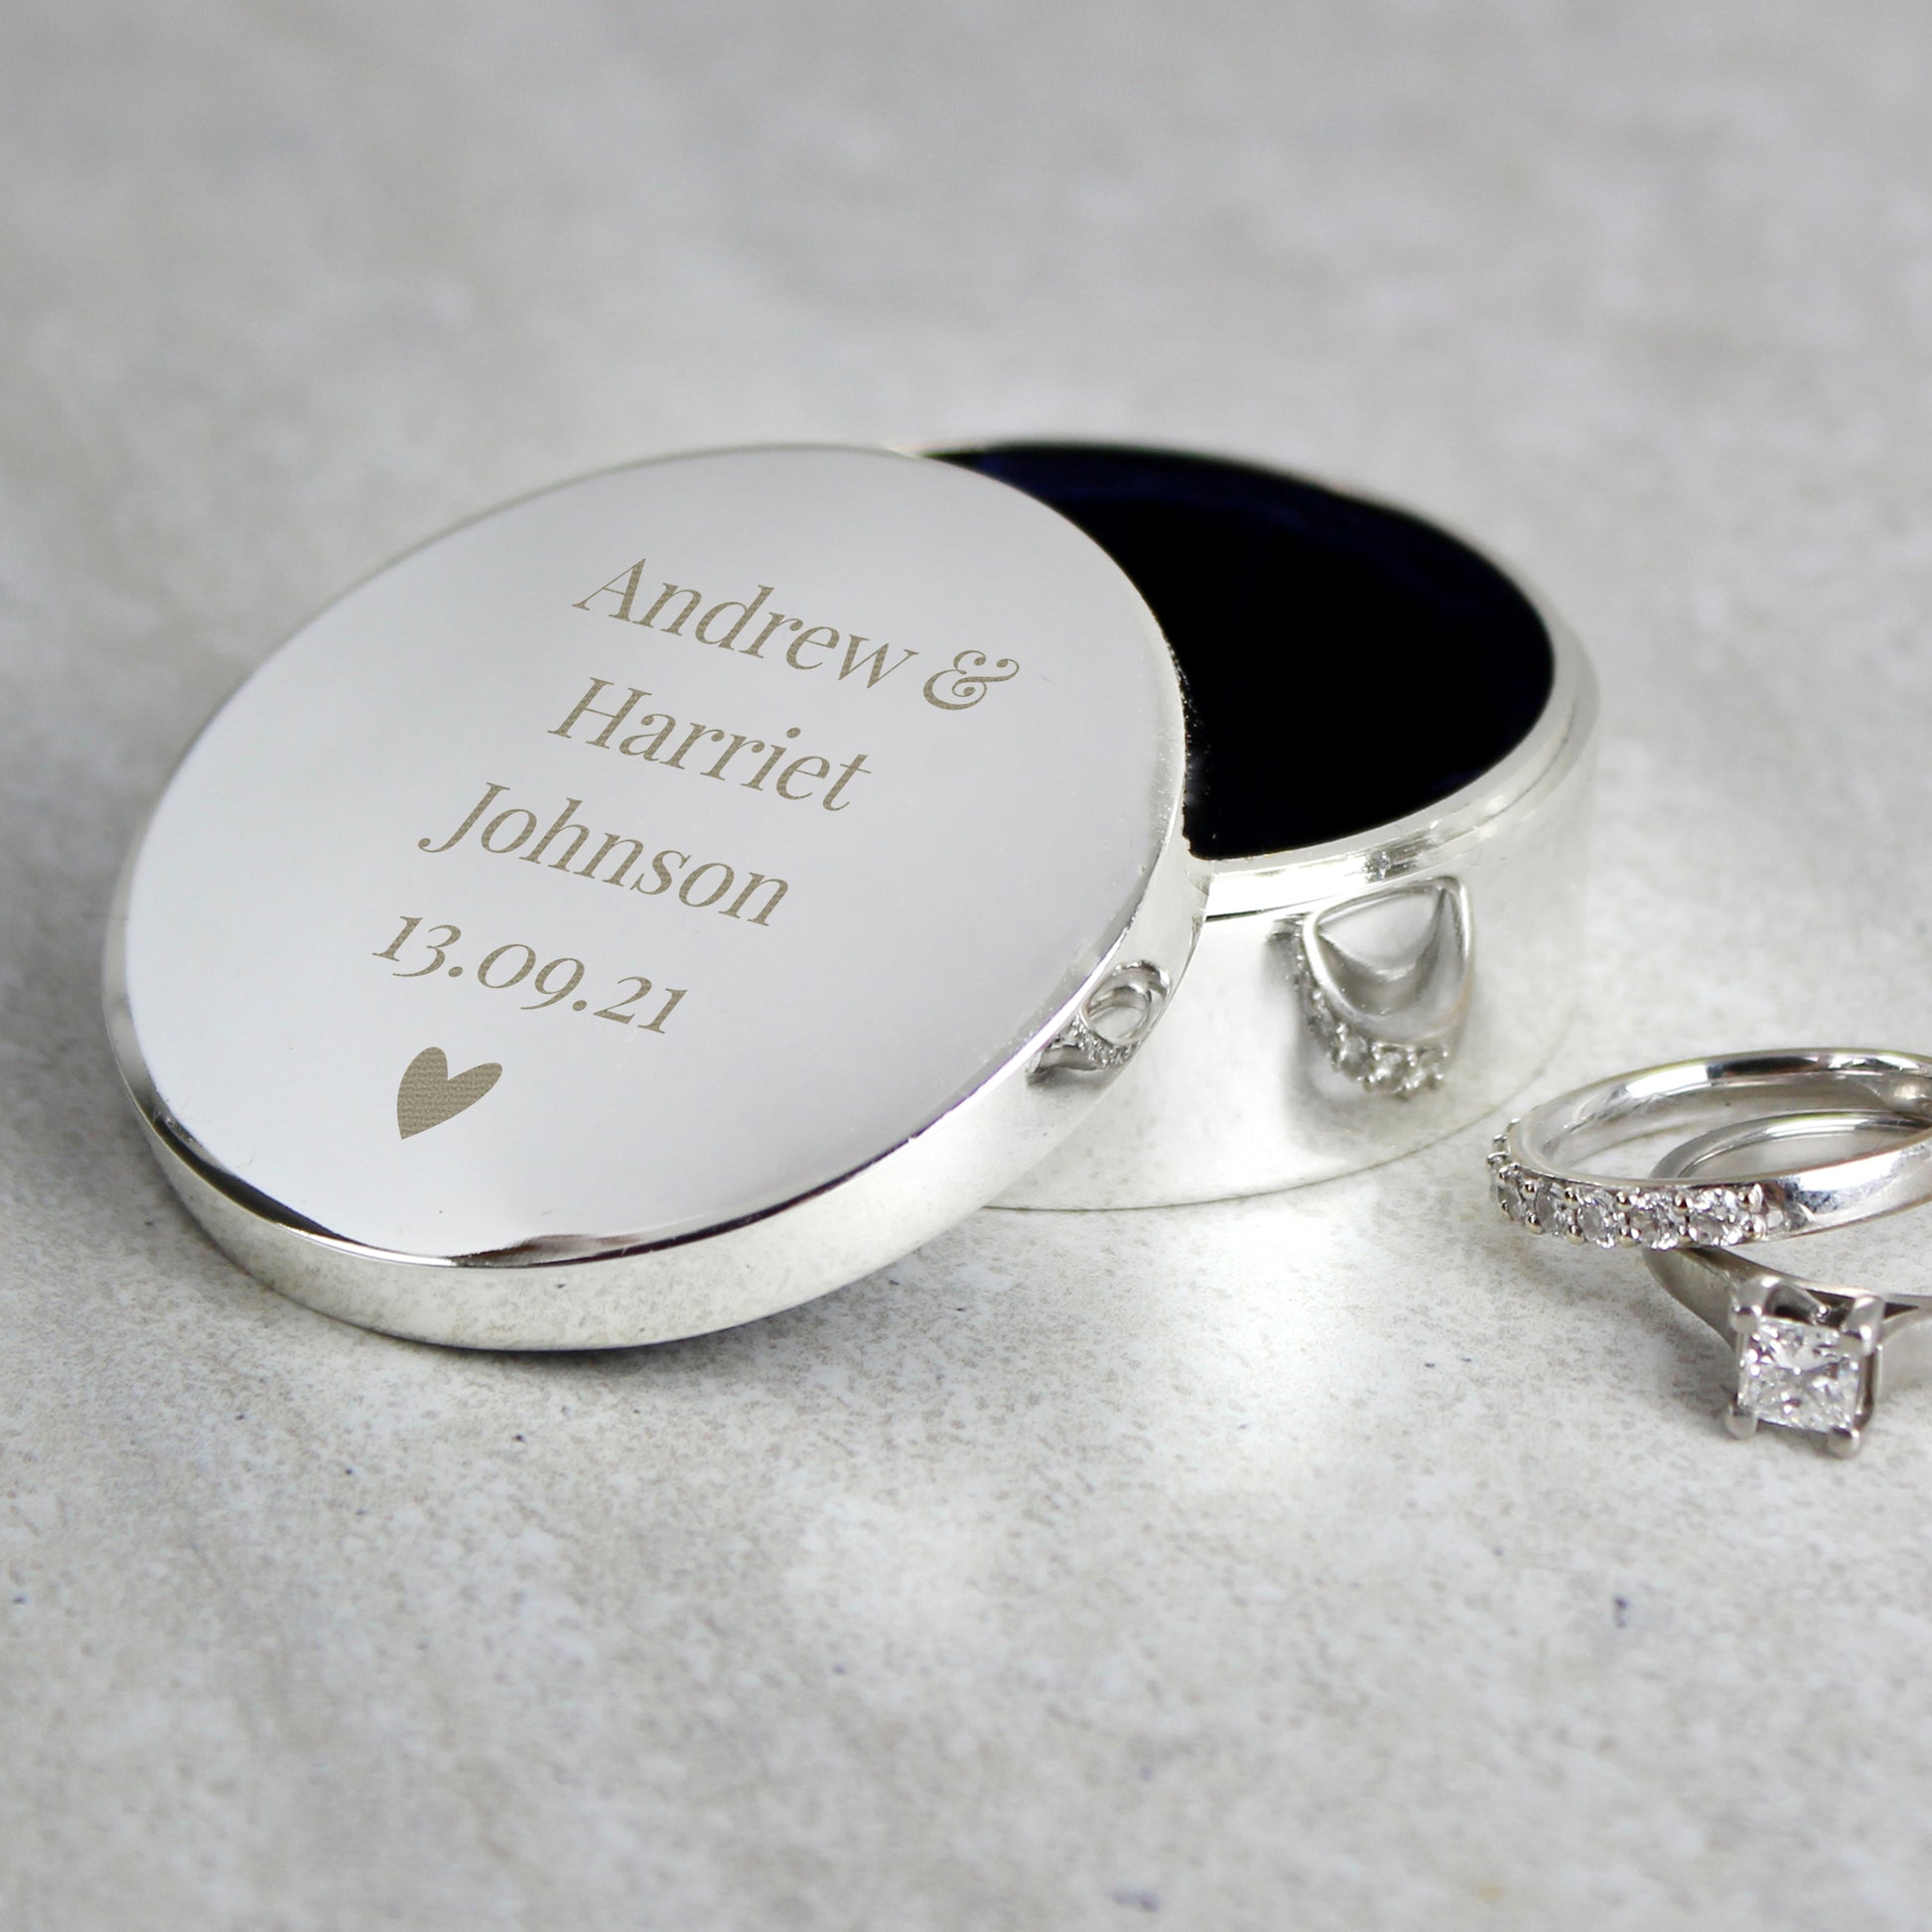 Personalised ring box with love heart engraved with couples' names and wedding date